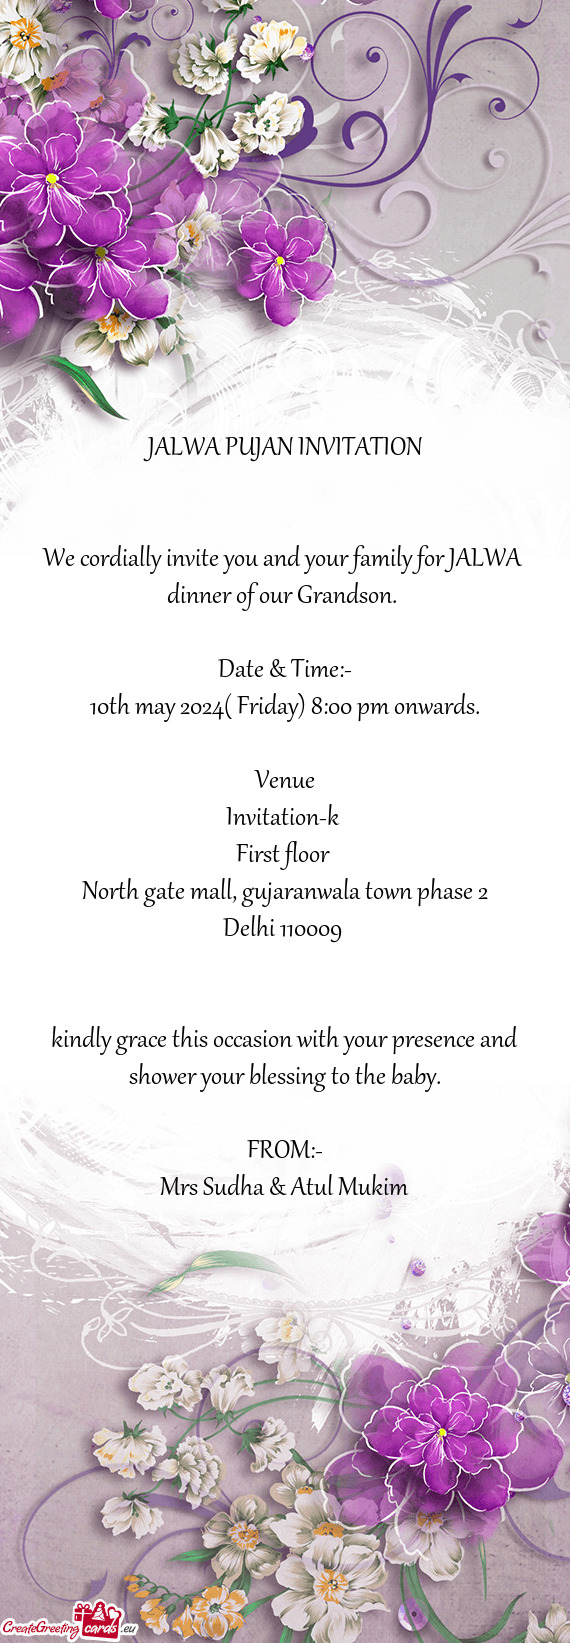 We cordially invite you and your family for JALWA dinner of our Grandson